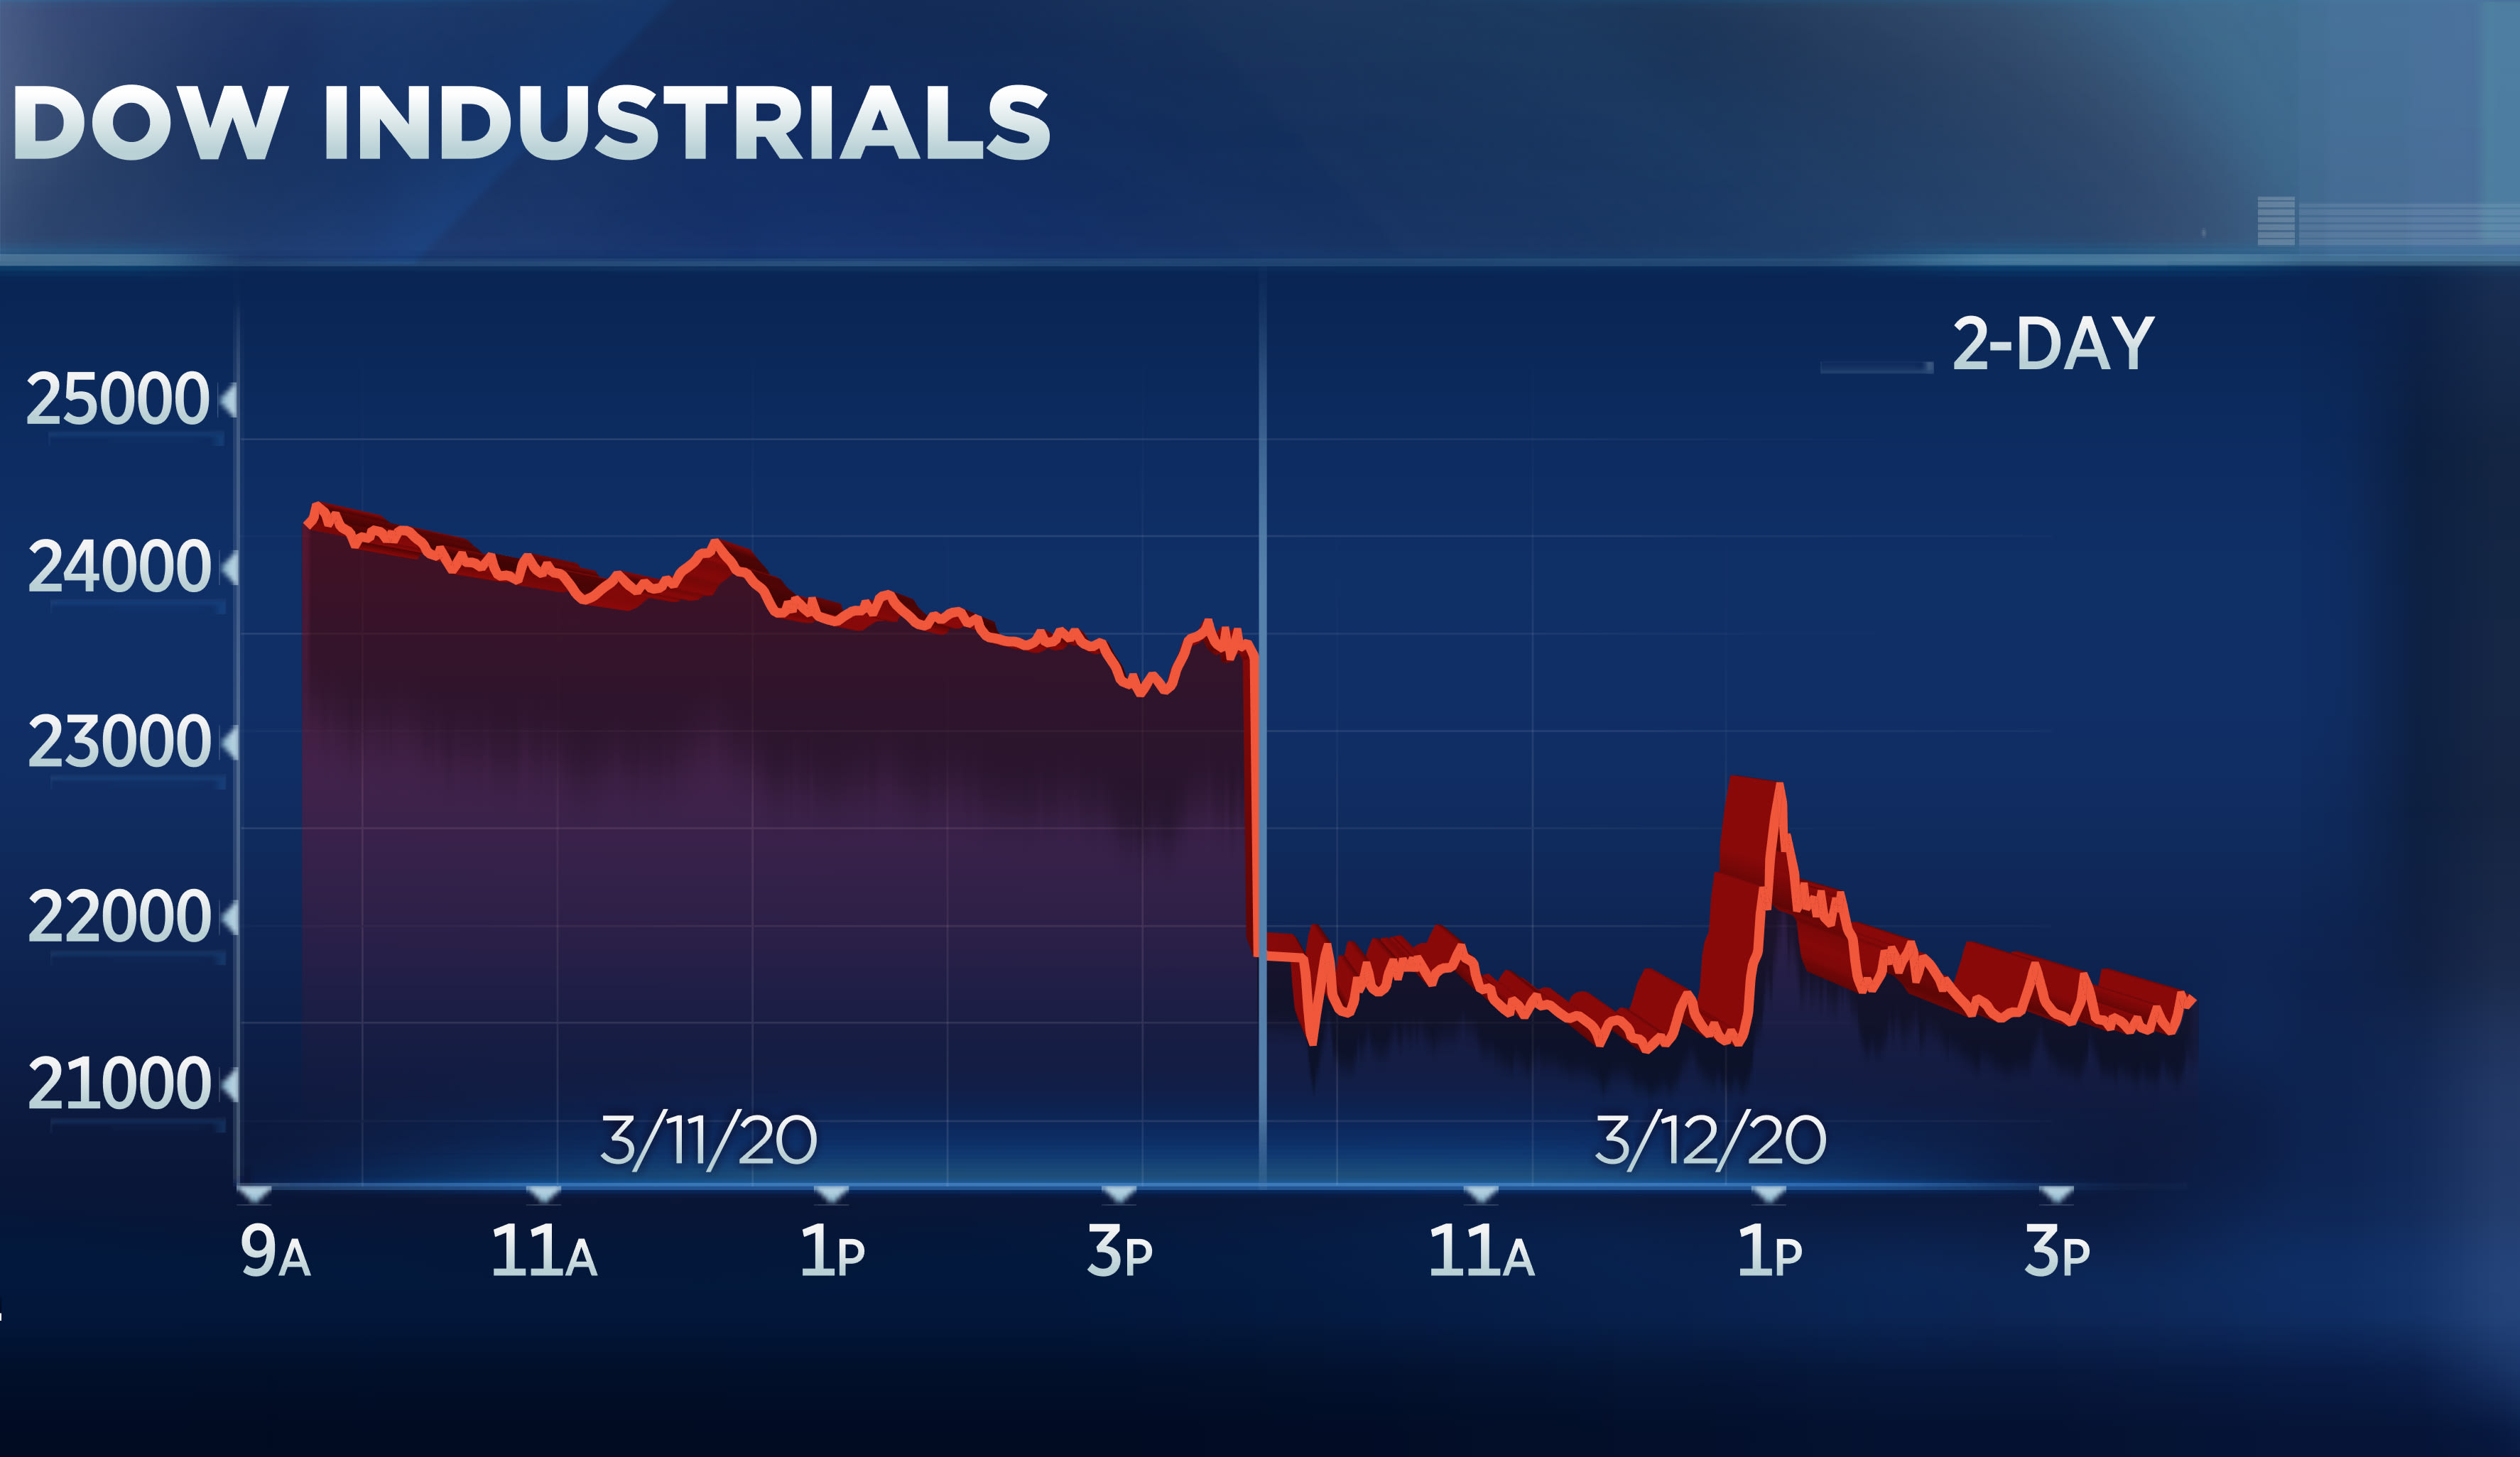 Dow plunges 10% amid coronavirus fears for its worst day since the 1987 market crash